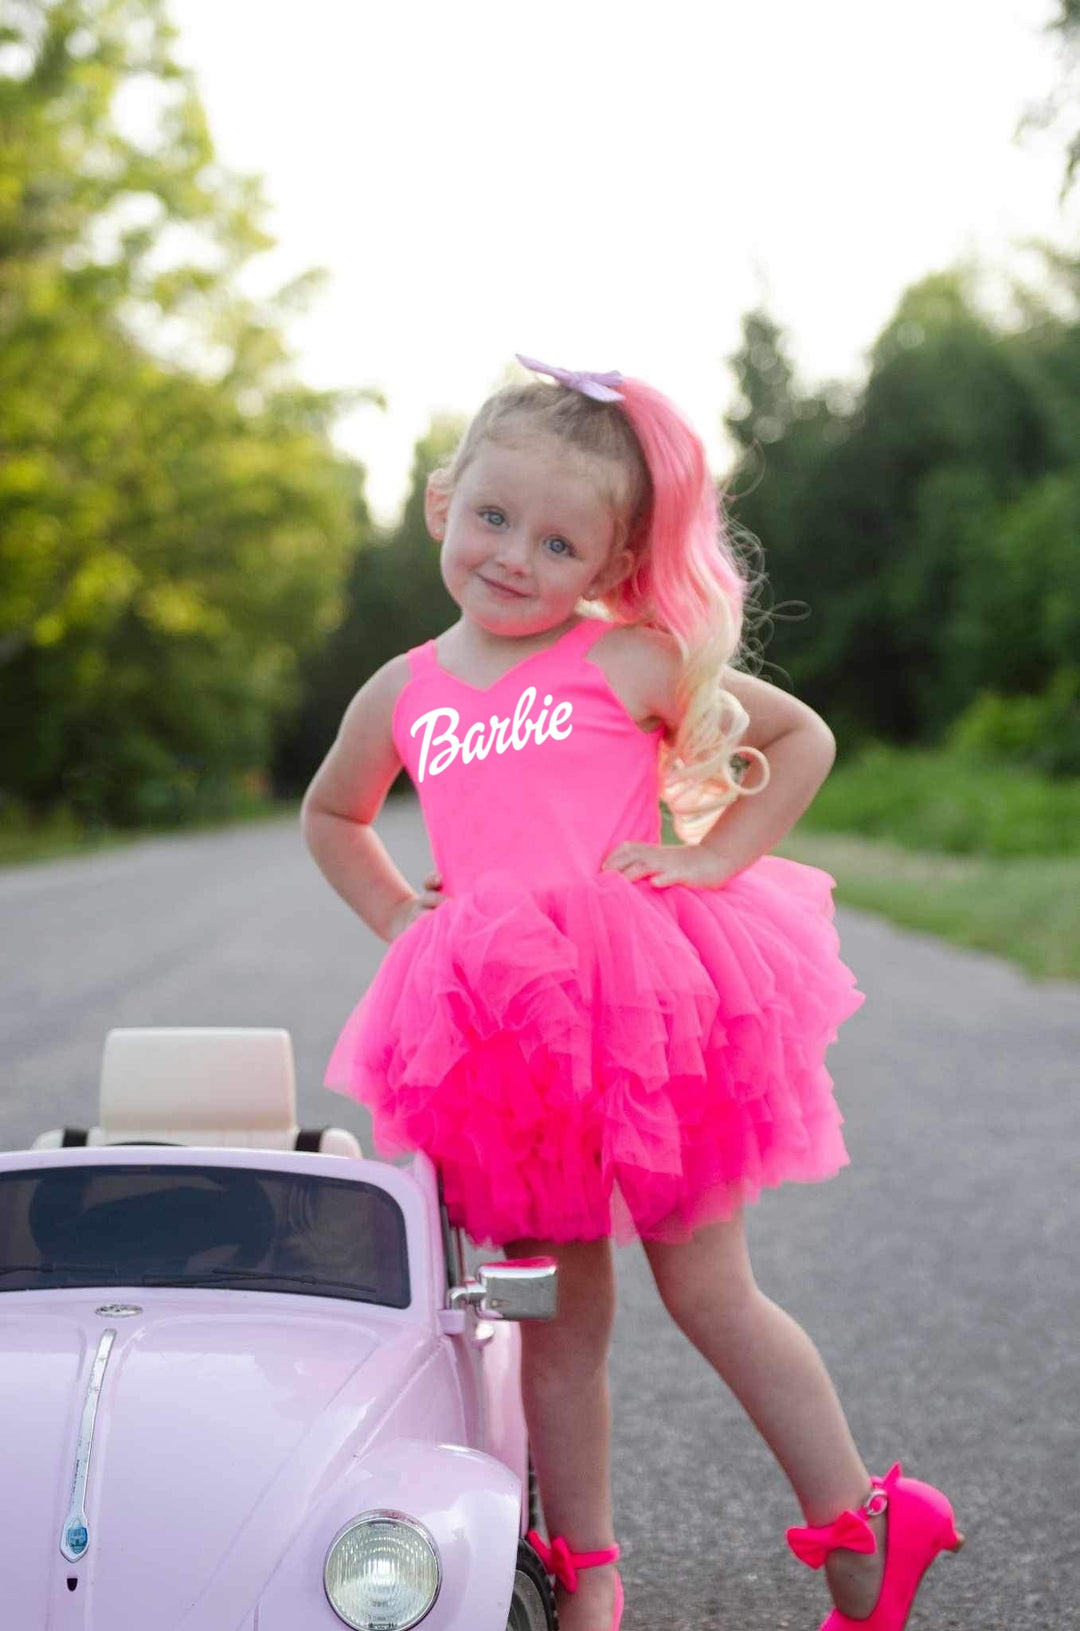 Neon pink soft tulle B girl